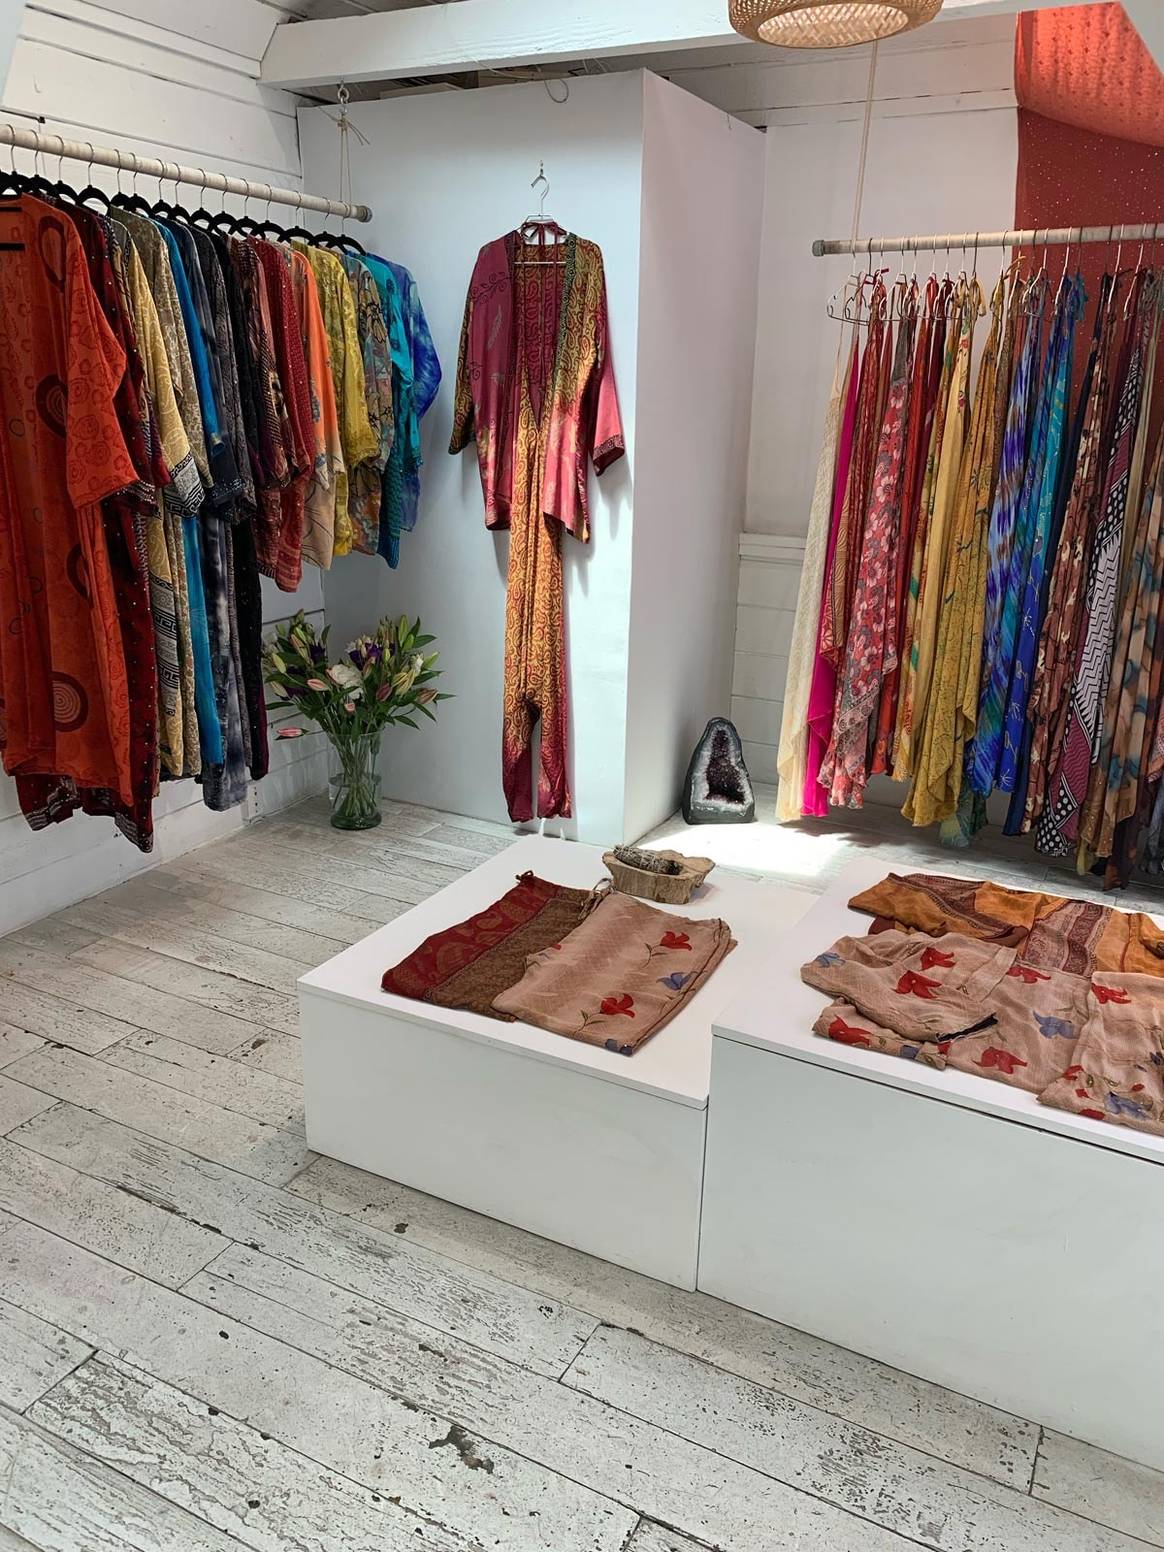 Los Angeles brand Sun Child launches pop-up to showcase one-of-a-kind designs